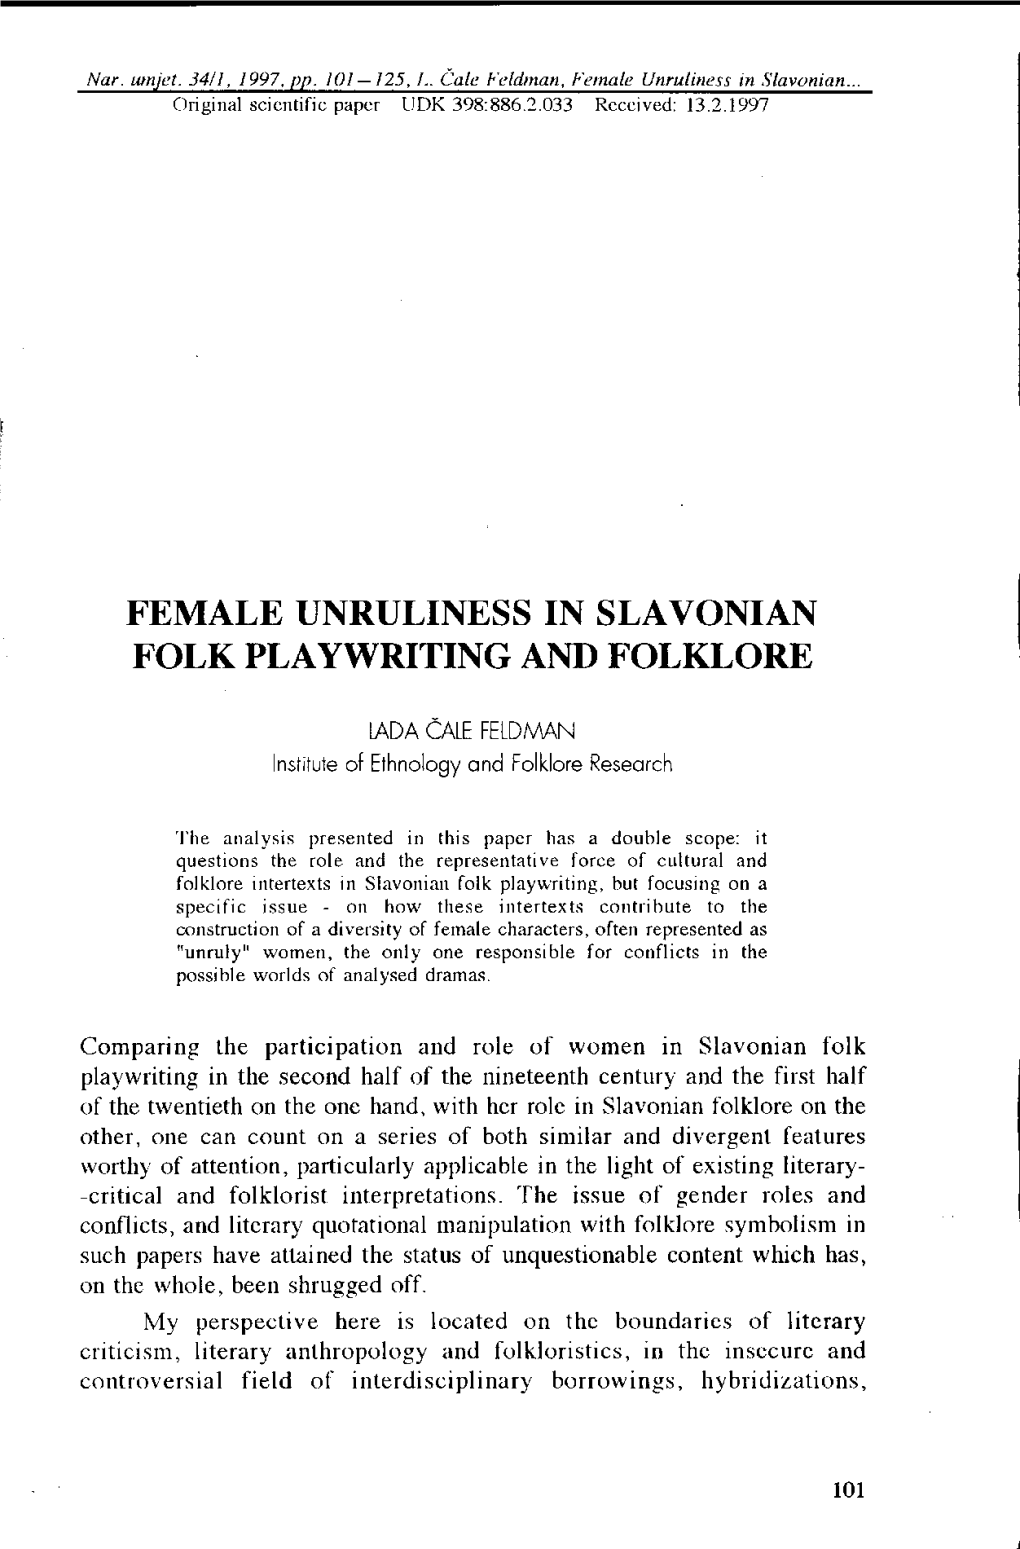 Female Unruliness in Slavonian Folk Playwriting and Folklore